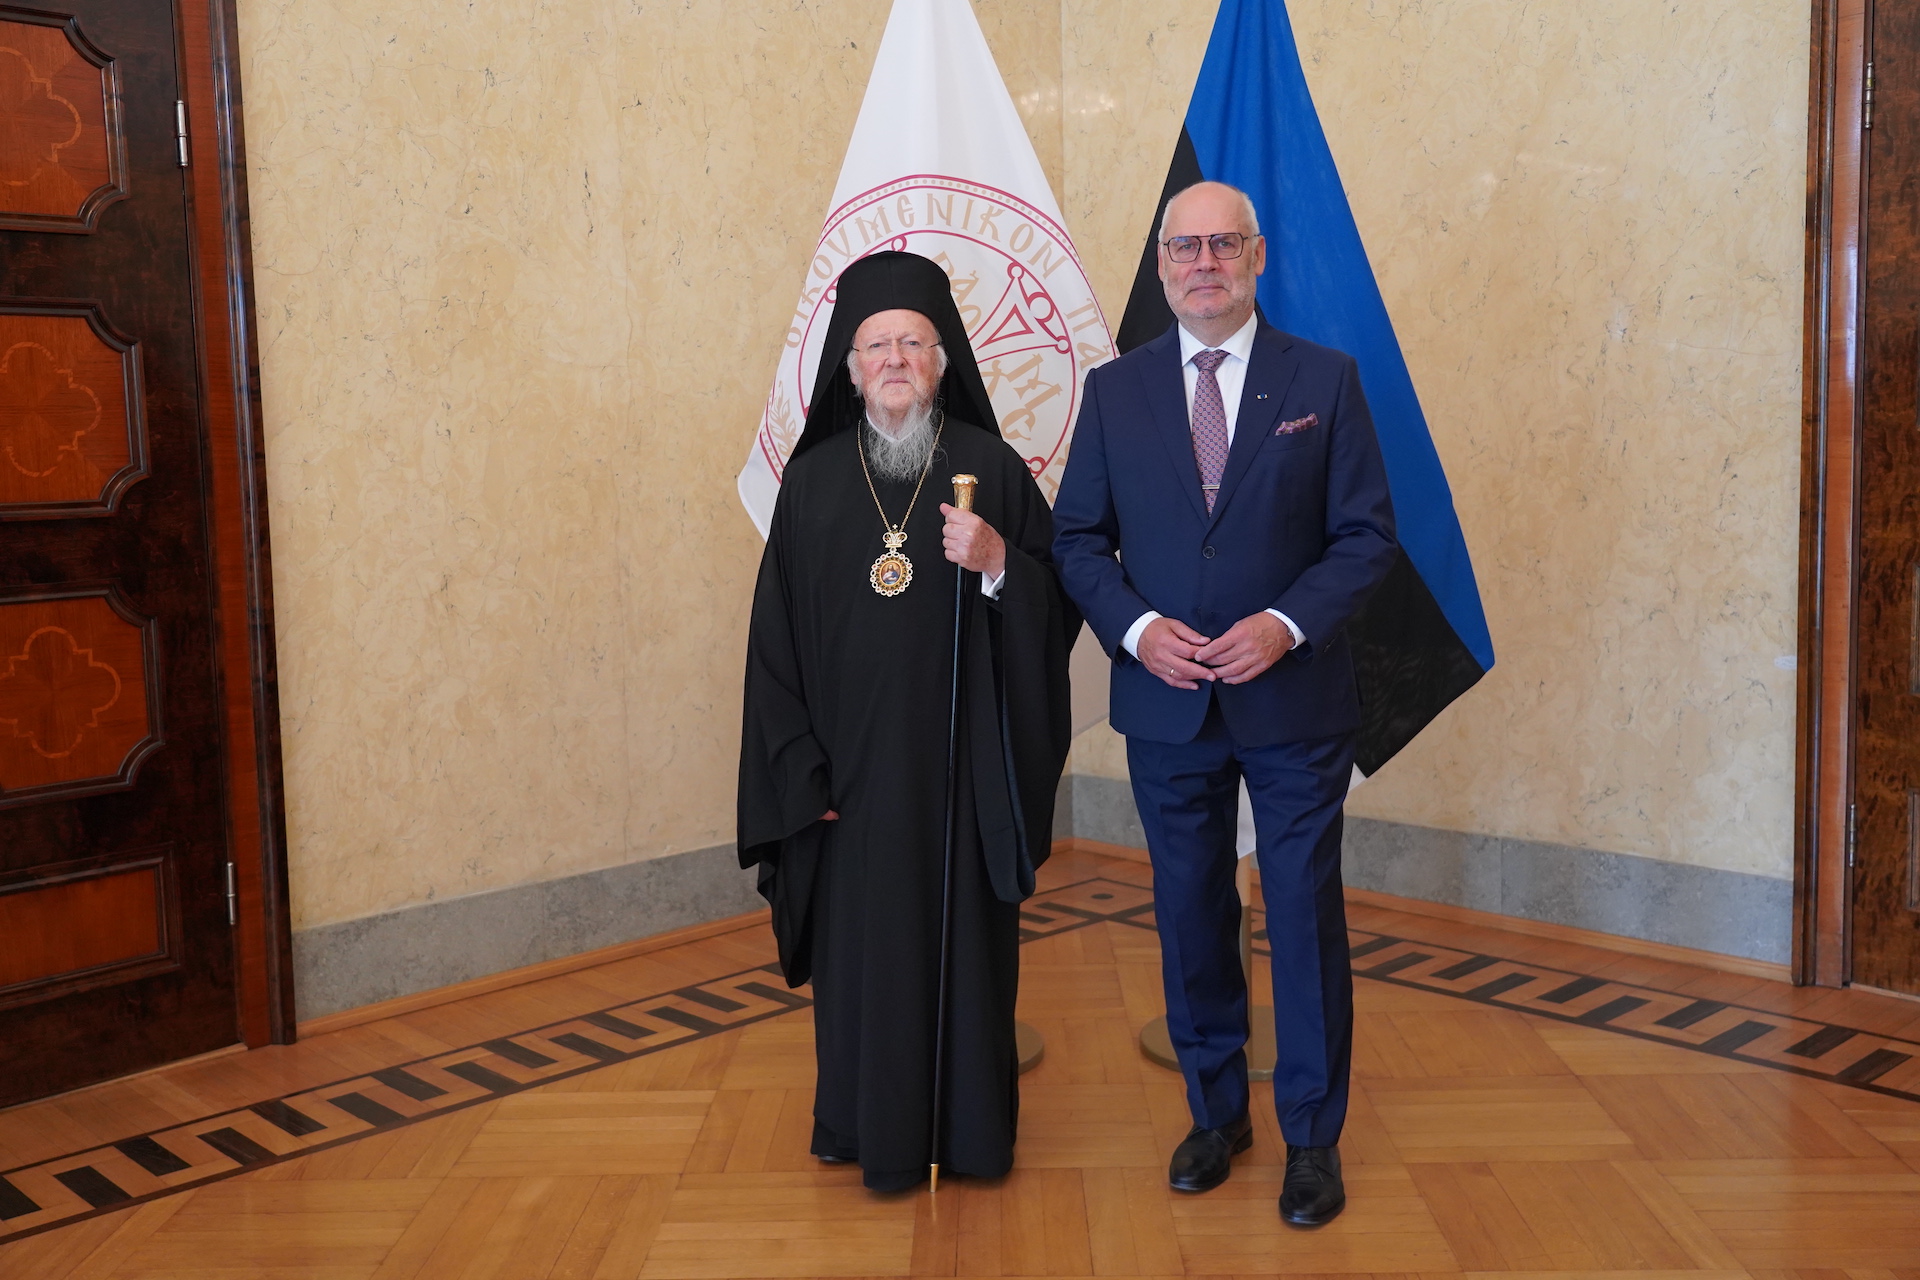 Ecumenical Patriarch Met with President and Prime Minister of Estonia